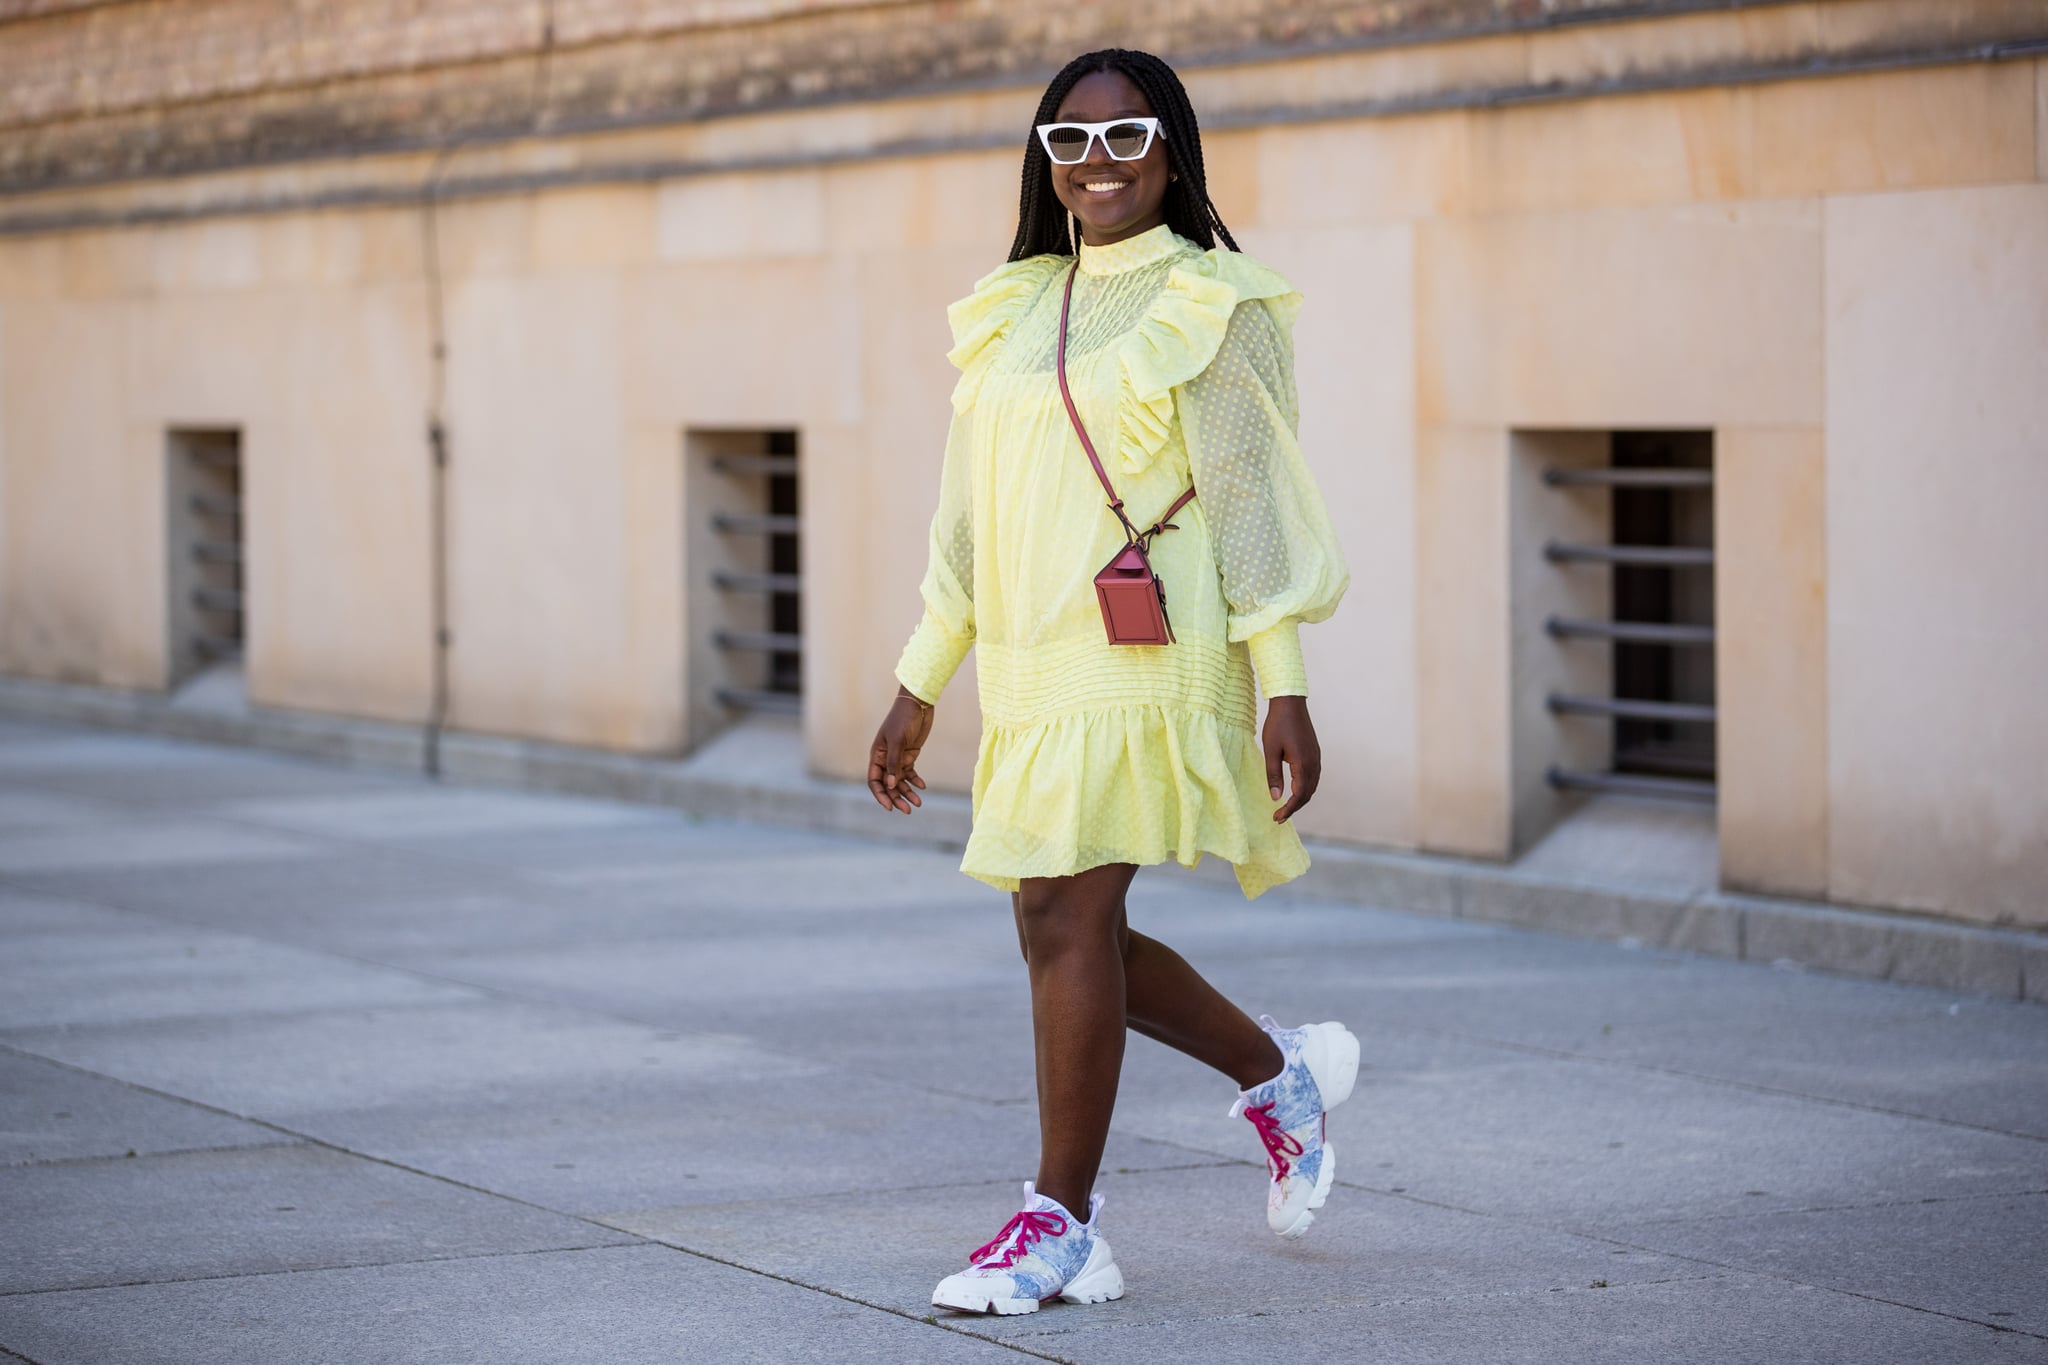 PUMA Colorblock Sneakers — 8 Cool Outfit Ideas For Colorful Tennis Shoes -  The Mom Edit